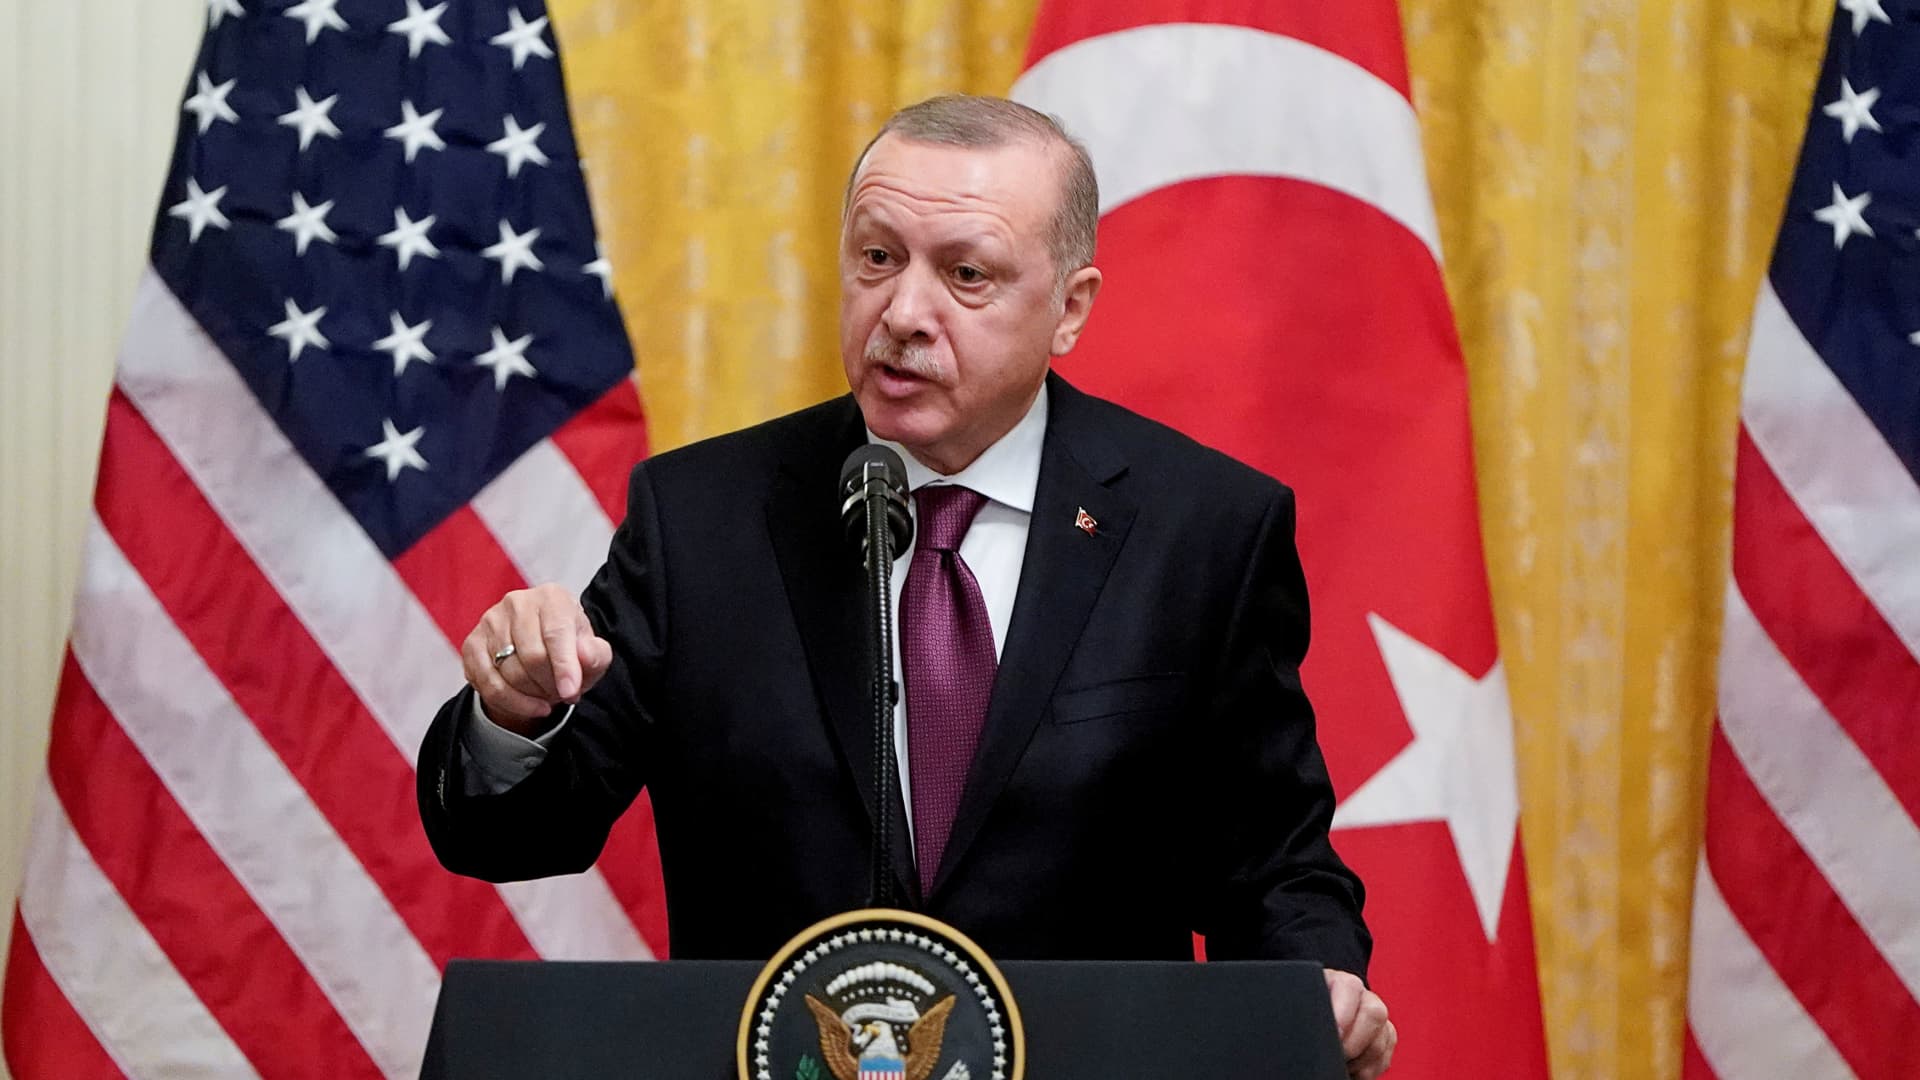 Turkish President Tayyip Erdogan answers questions during a joint news conference with U.S. President Donald Trump at the White House in Washington, U.S., November 13, 2019.